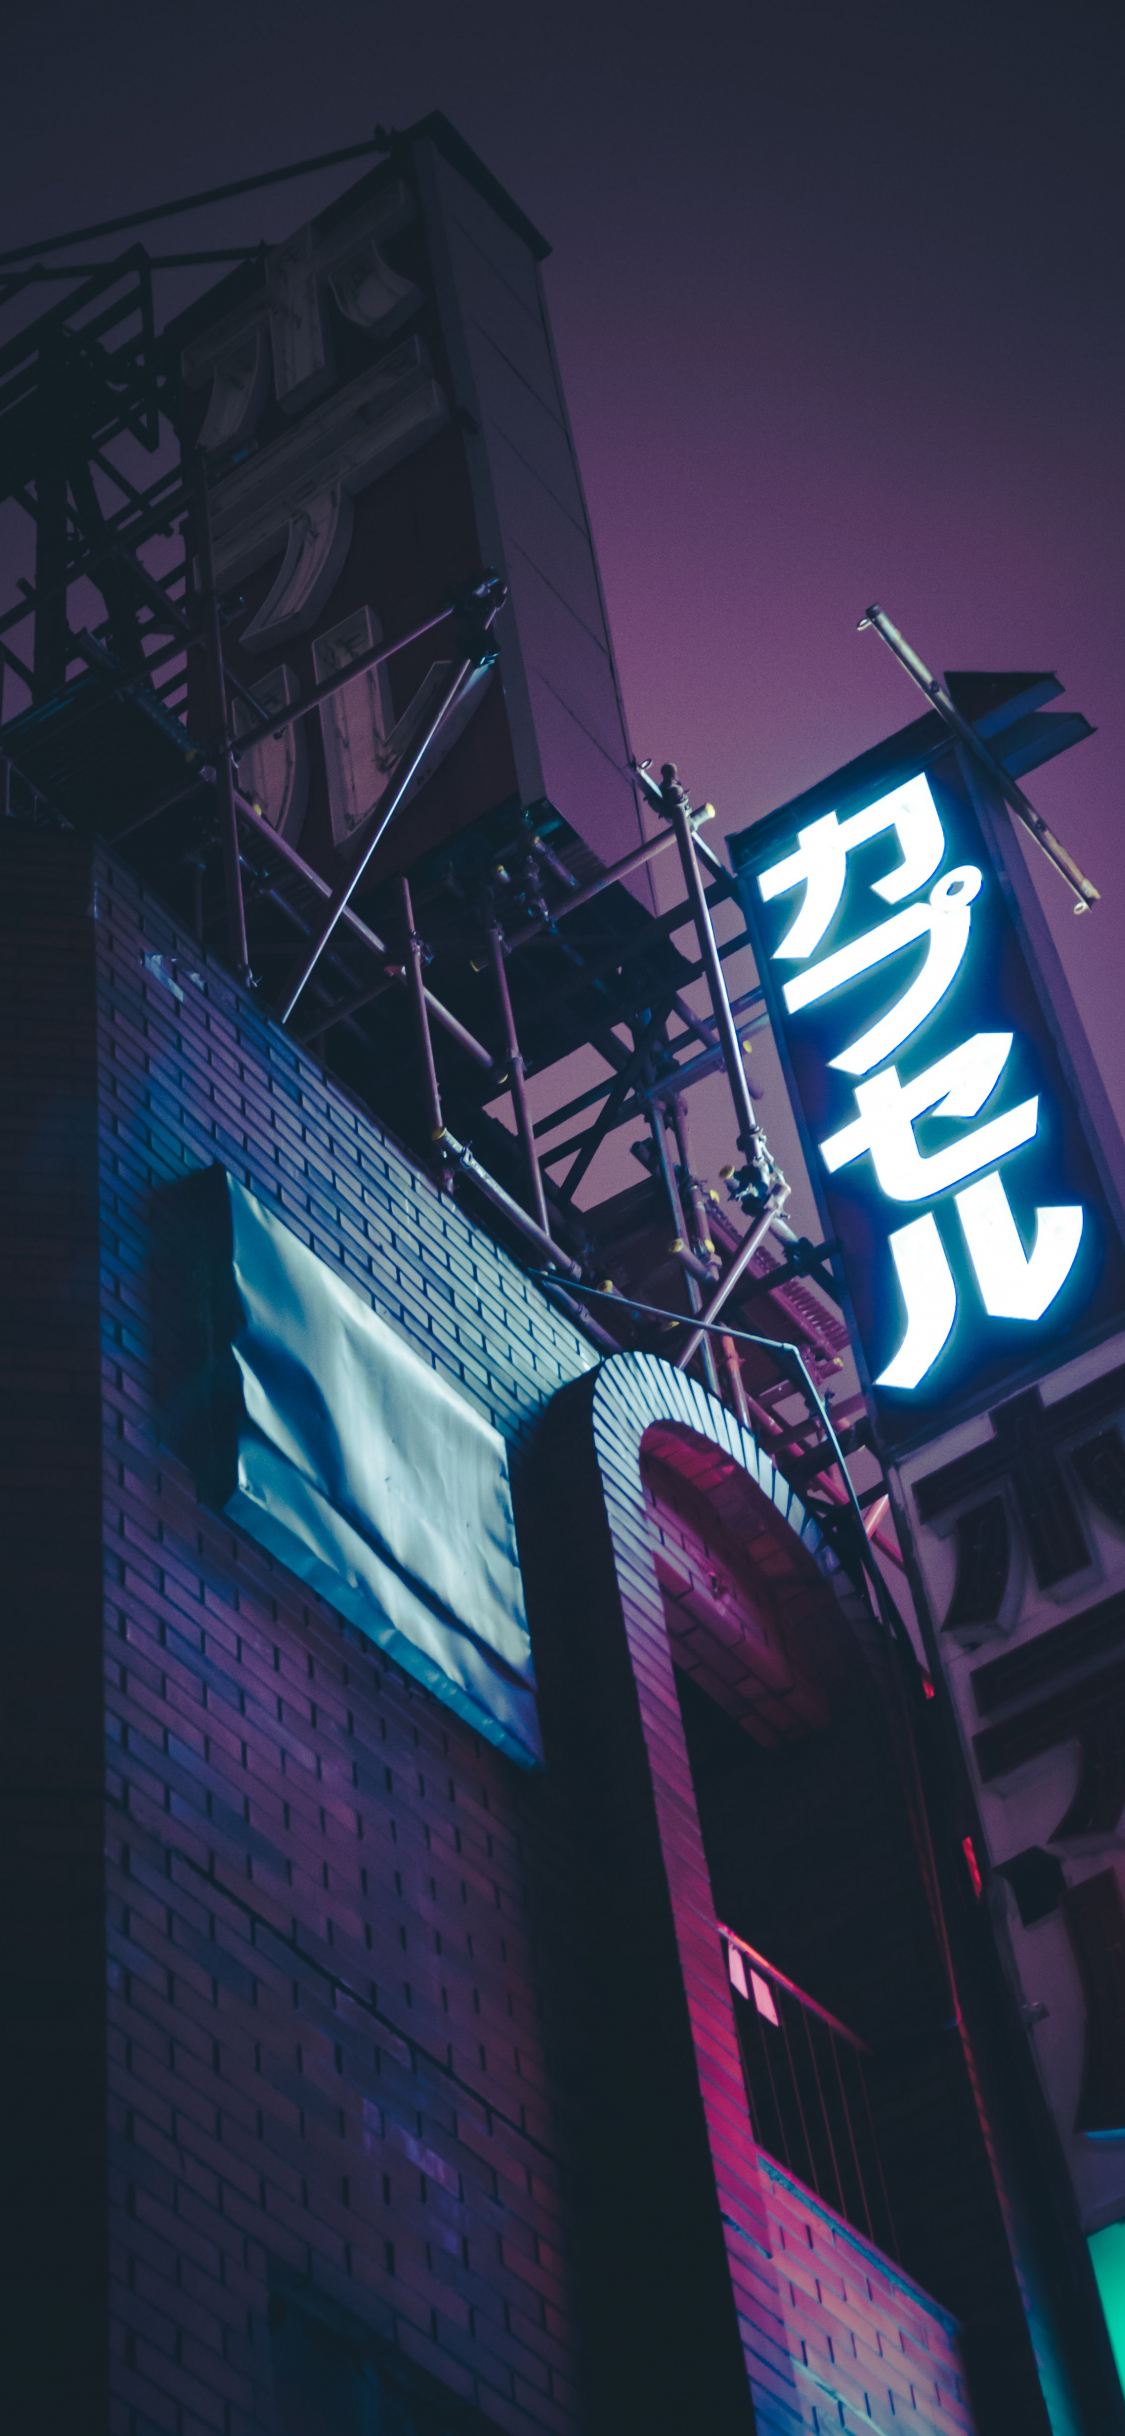 Free download Capsule room hotel With image Neon signs Japanese aesthetic [3264x4928] for your Desktop, Mobile & Tablet. Explore Japanese Aesthetic Wallpaper. Japanese Aesthetic Wallpaper, Aesthetic Wallpaper, Japanese Wallpaper